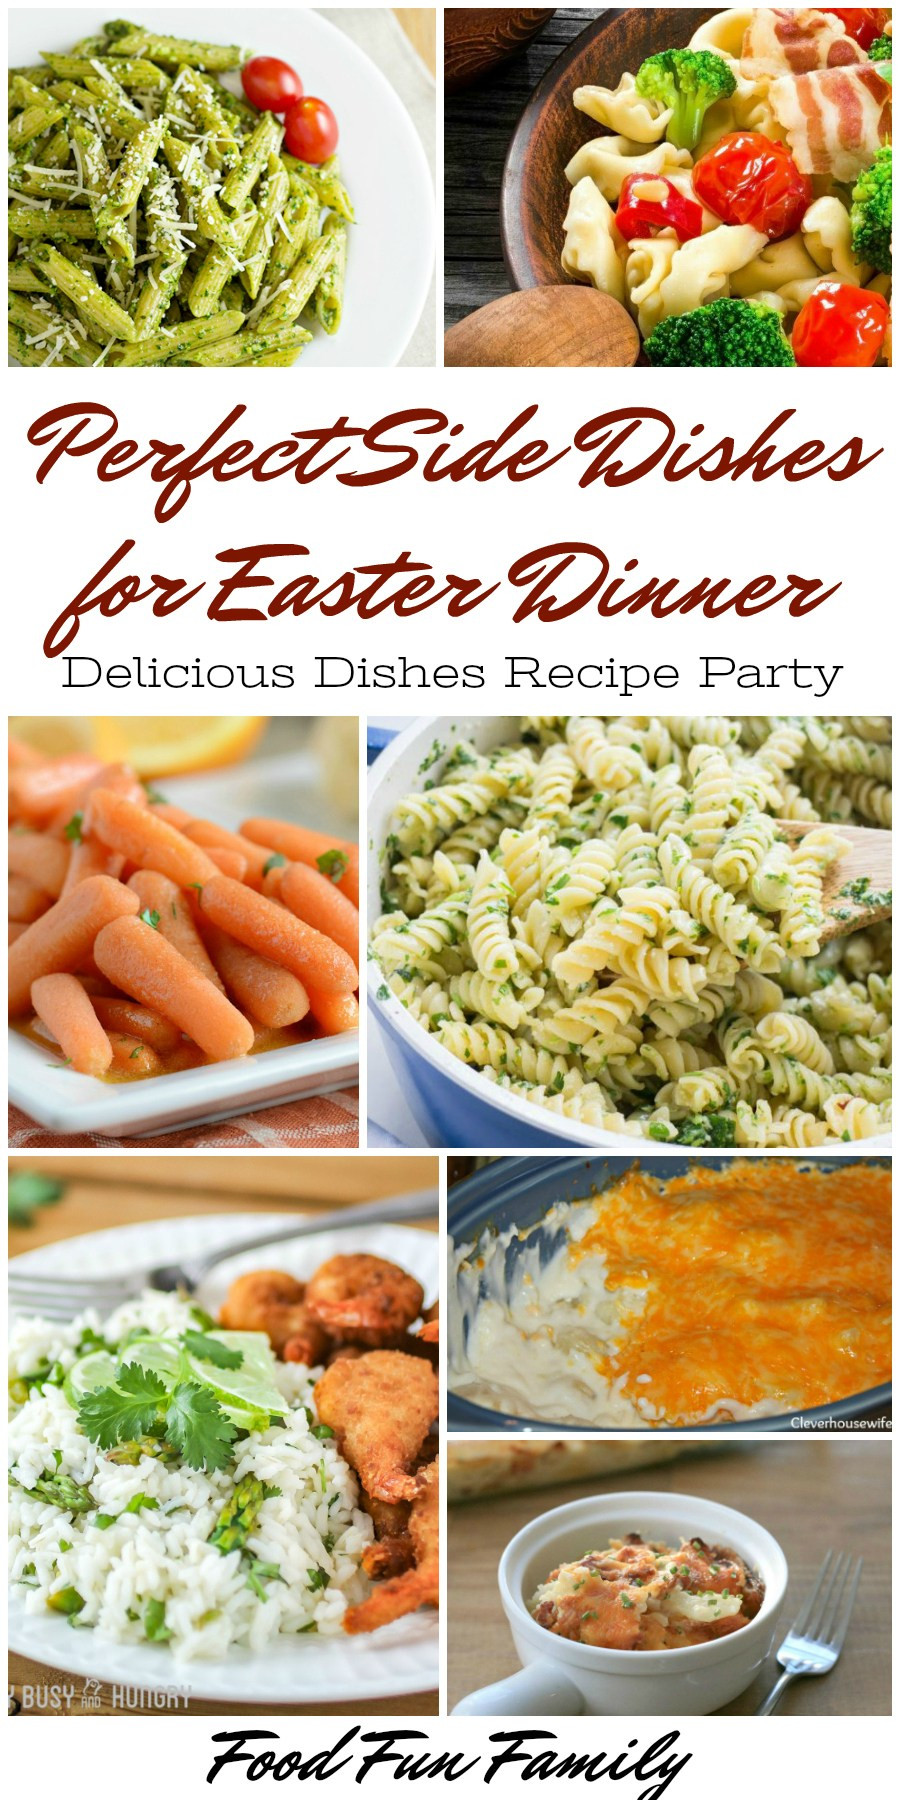 Side Dishes For Easter Dinner
 Perfect Side Dishes for Easter Dinner – Delicious Dishes